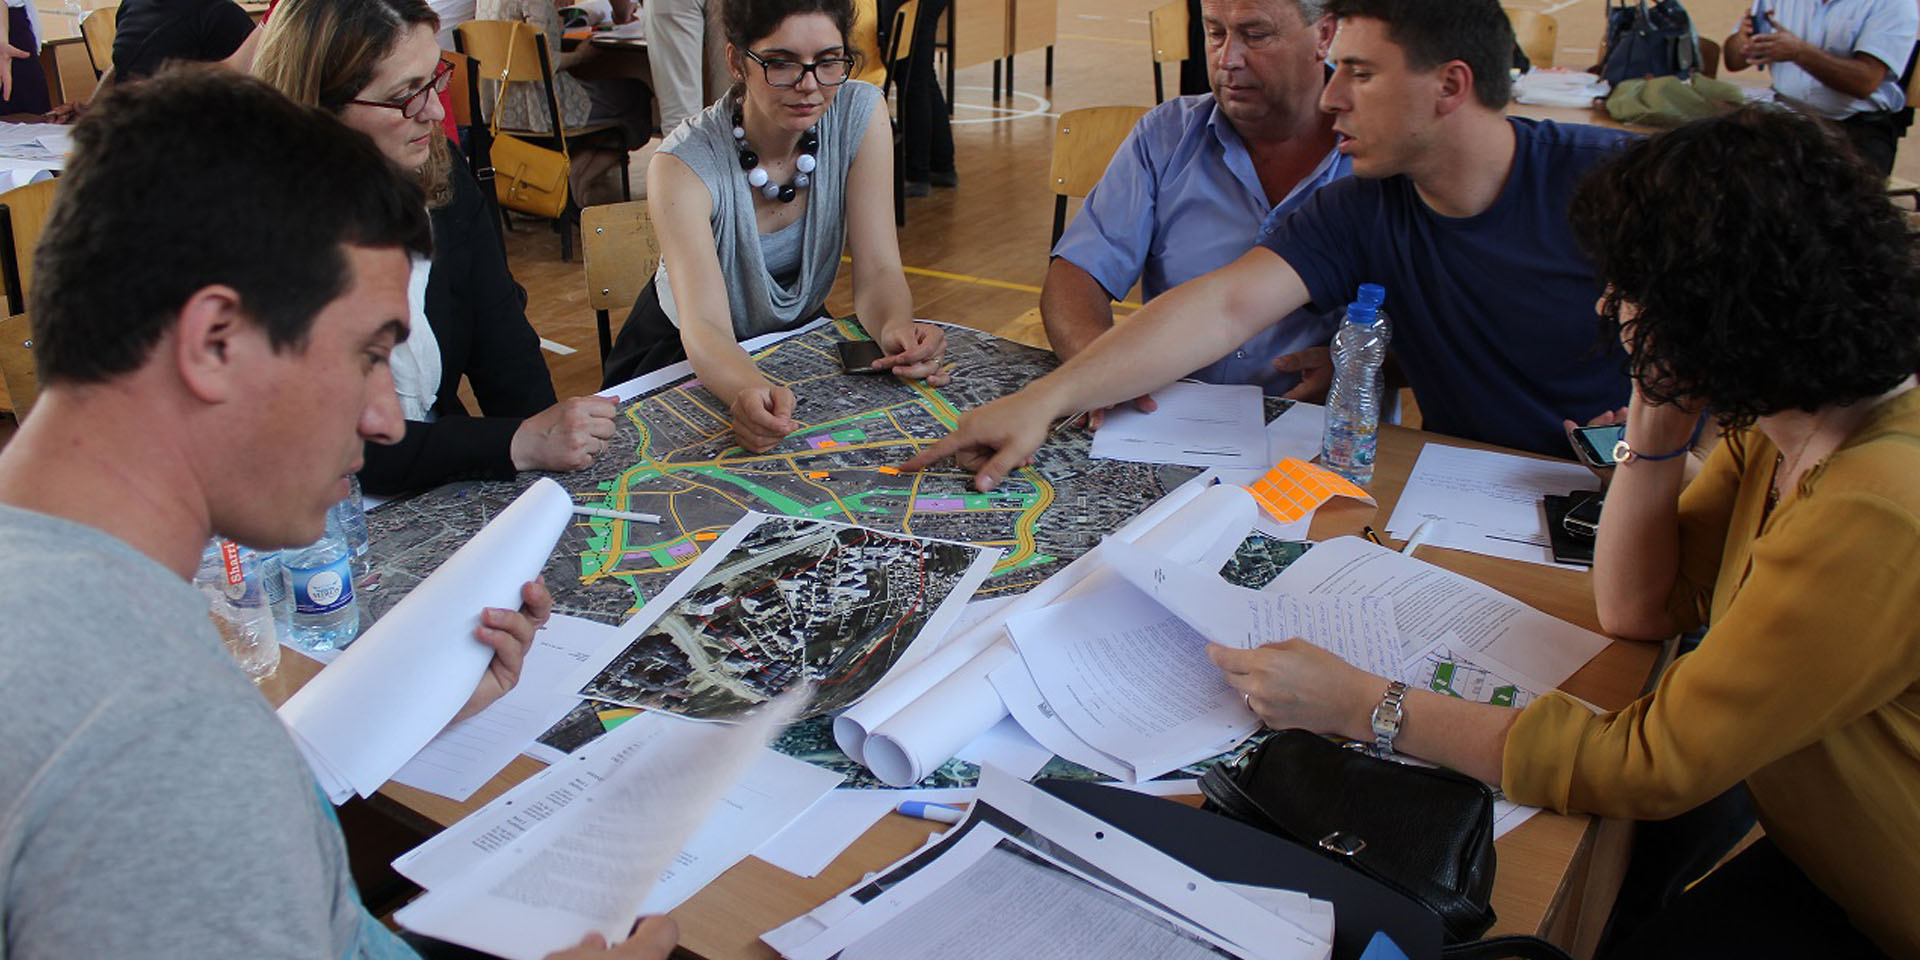 A group of people sitting at a table and discussing a large map laid out between them.